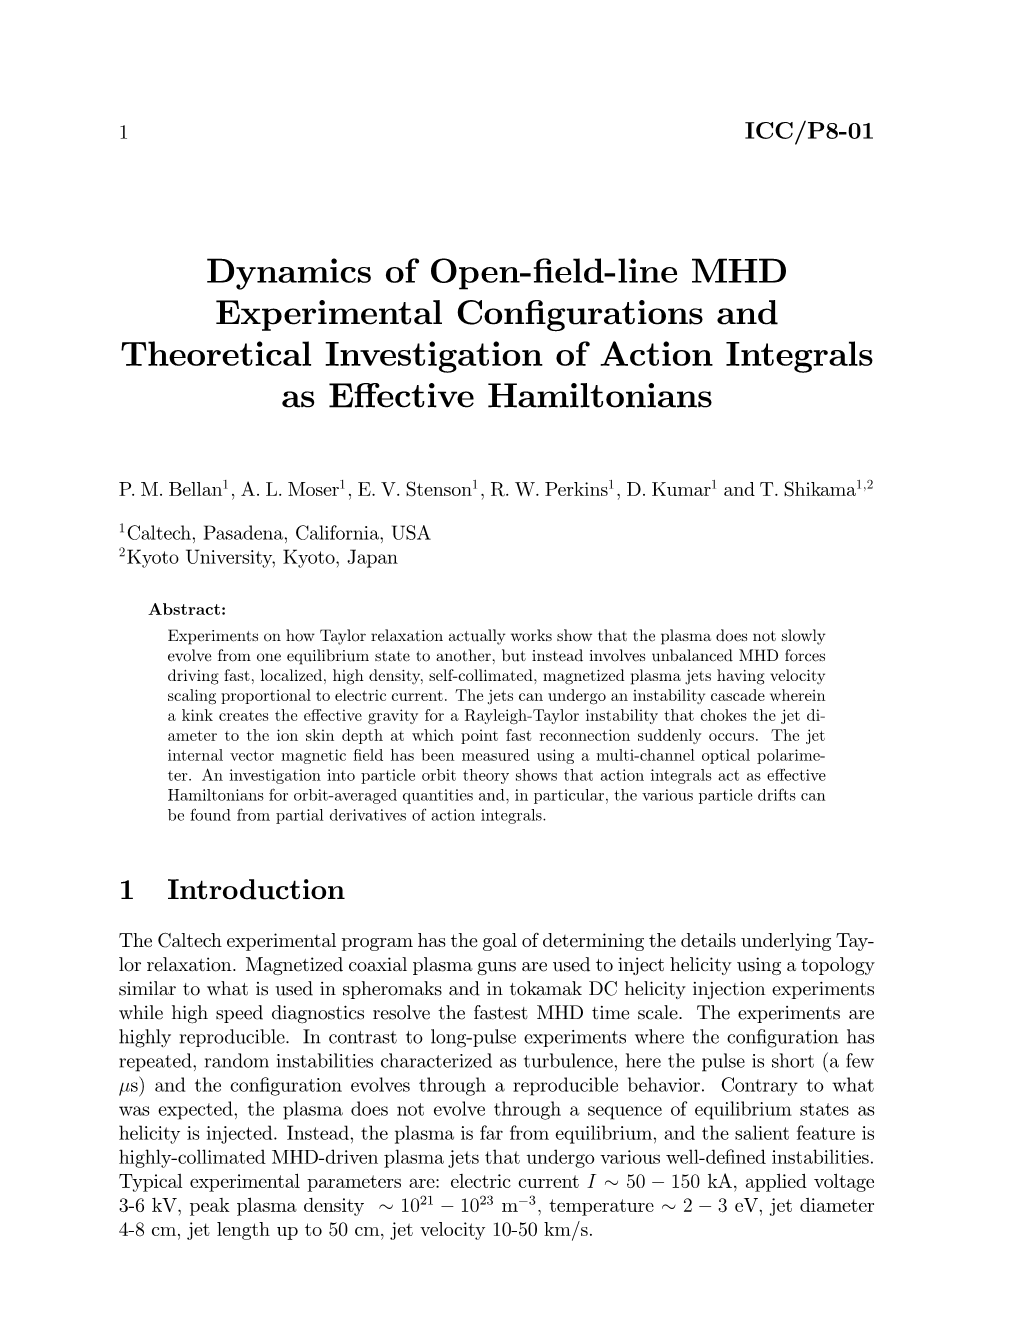 Dynamics of Open-Field-Line MHD Experimental Configurations And